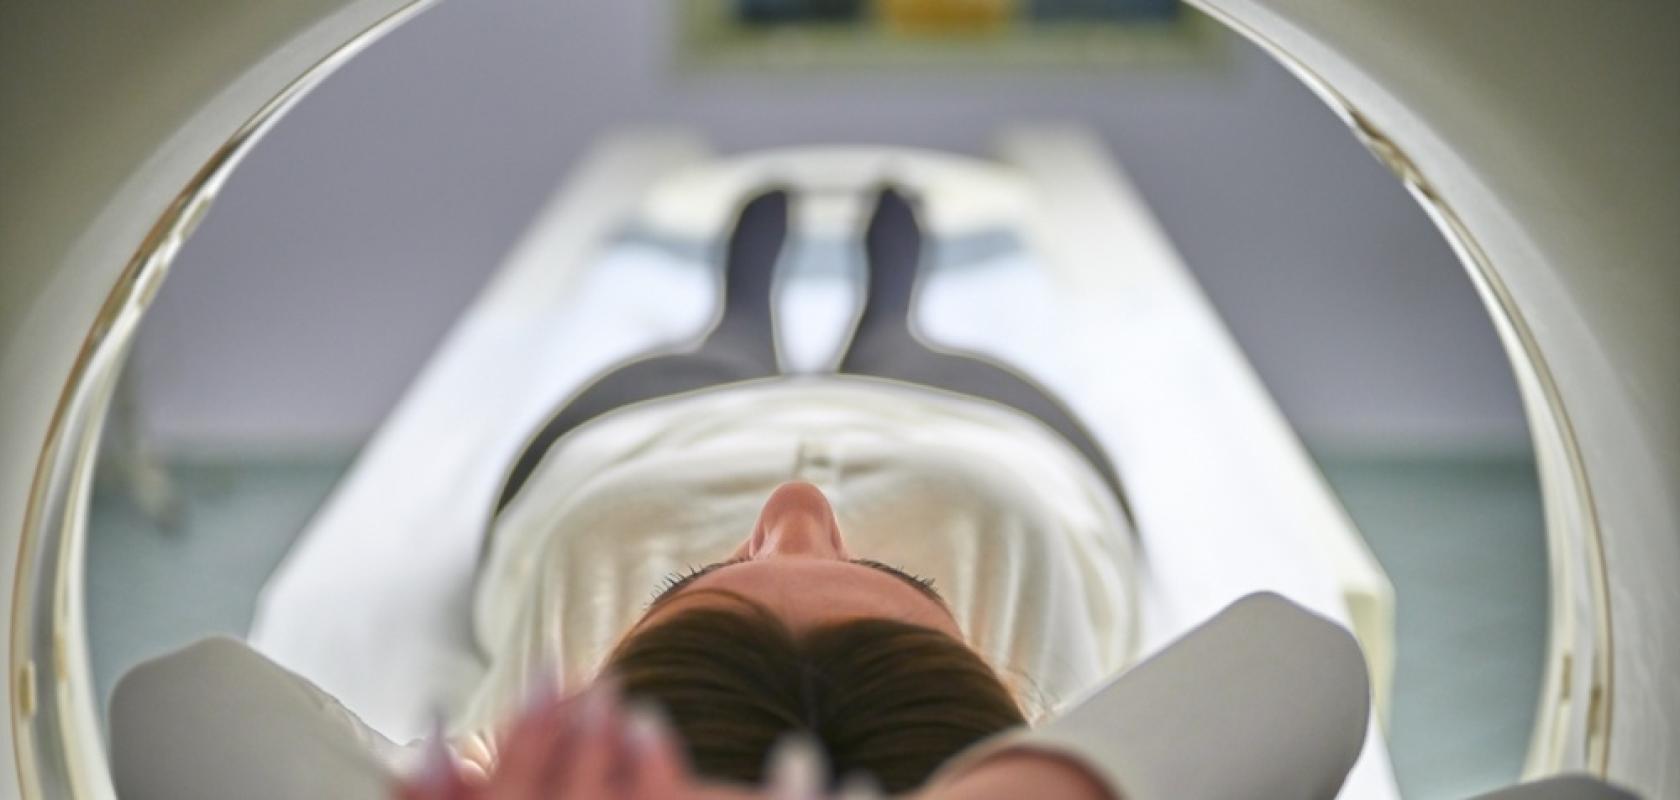 A person in a medical scanner